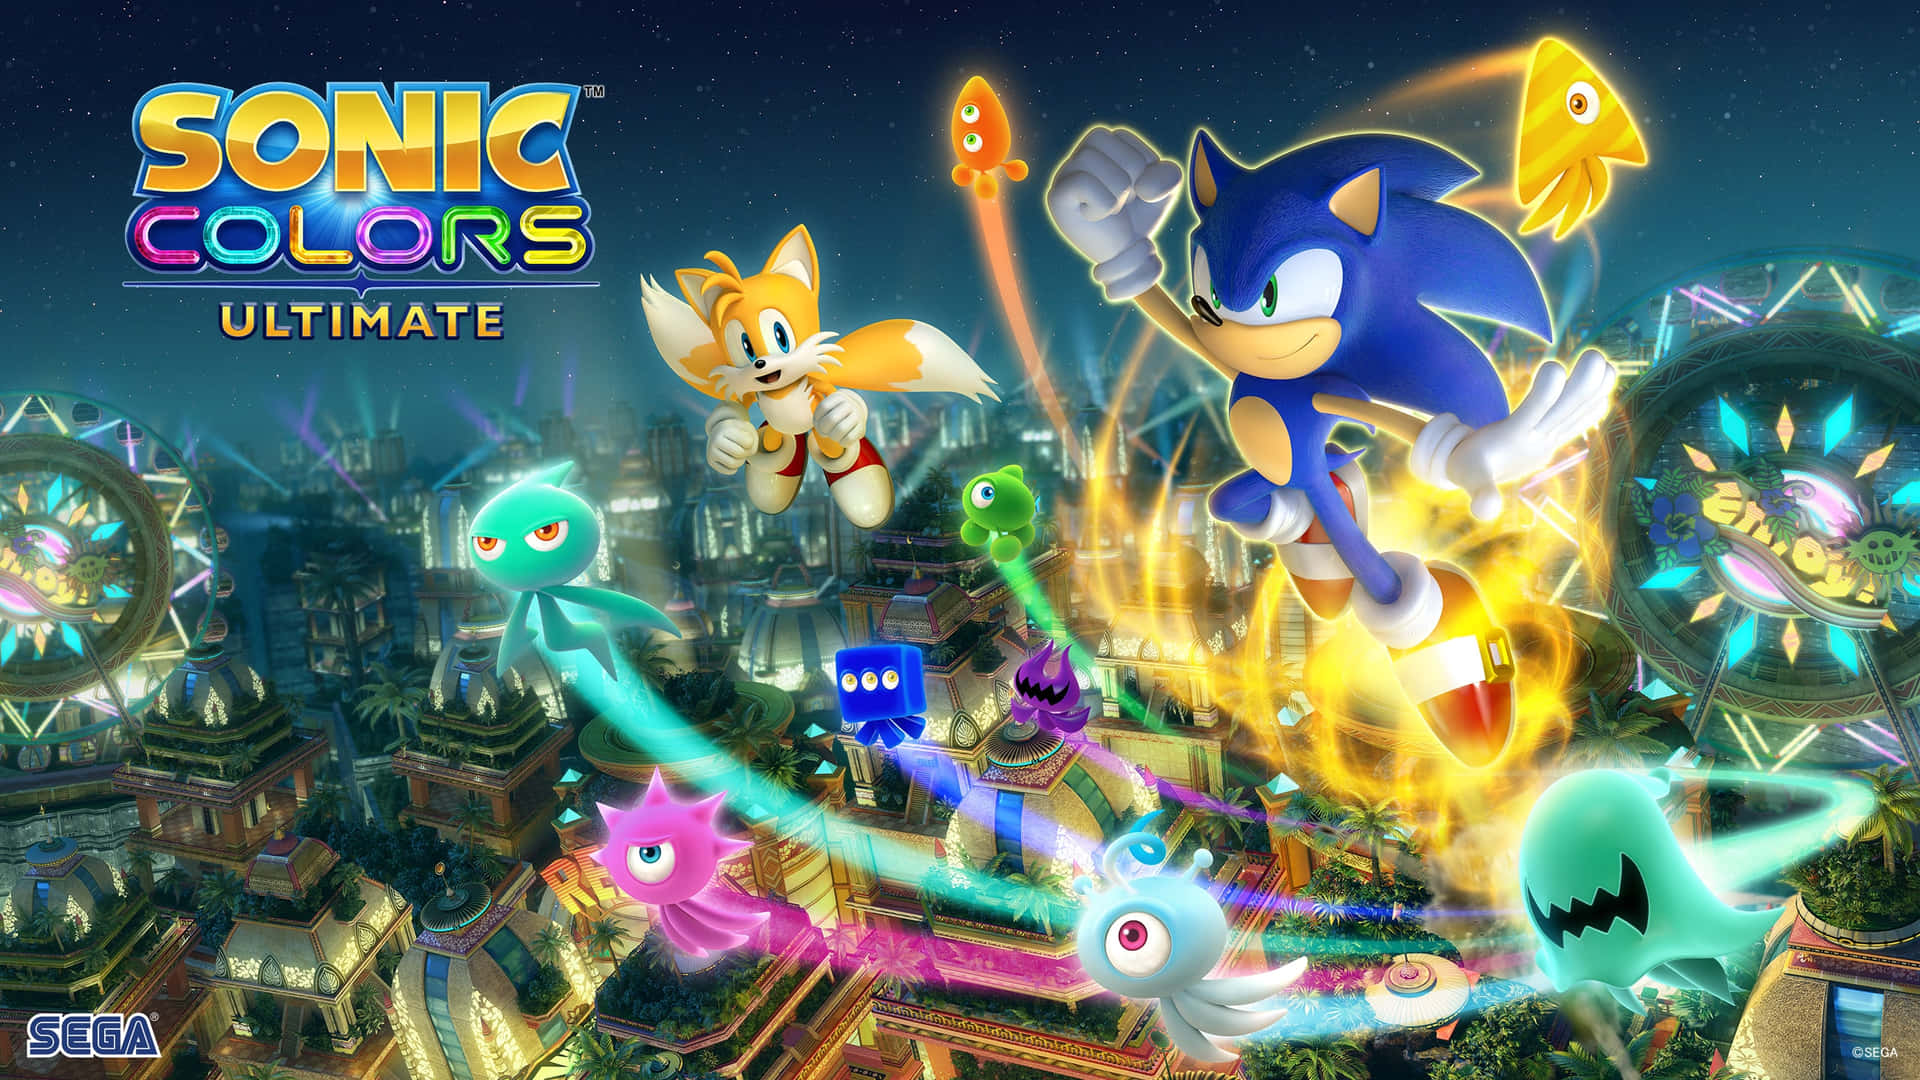 Sonic Colors – Experience an exciting adventure on a colorful race to save stars and planets! Wallpaper